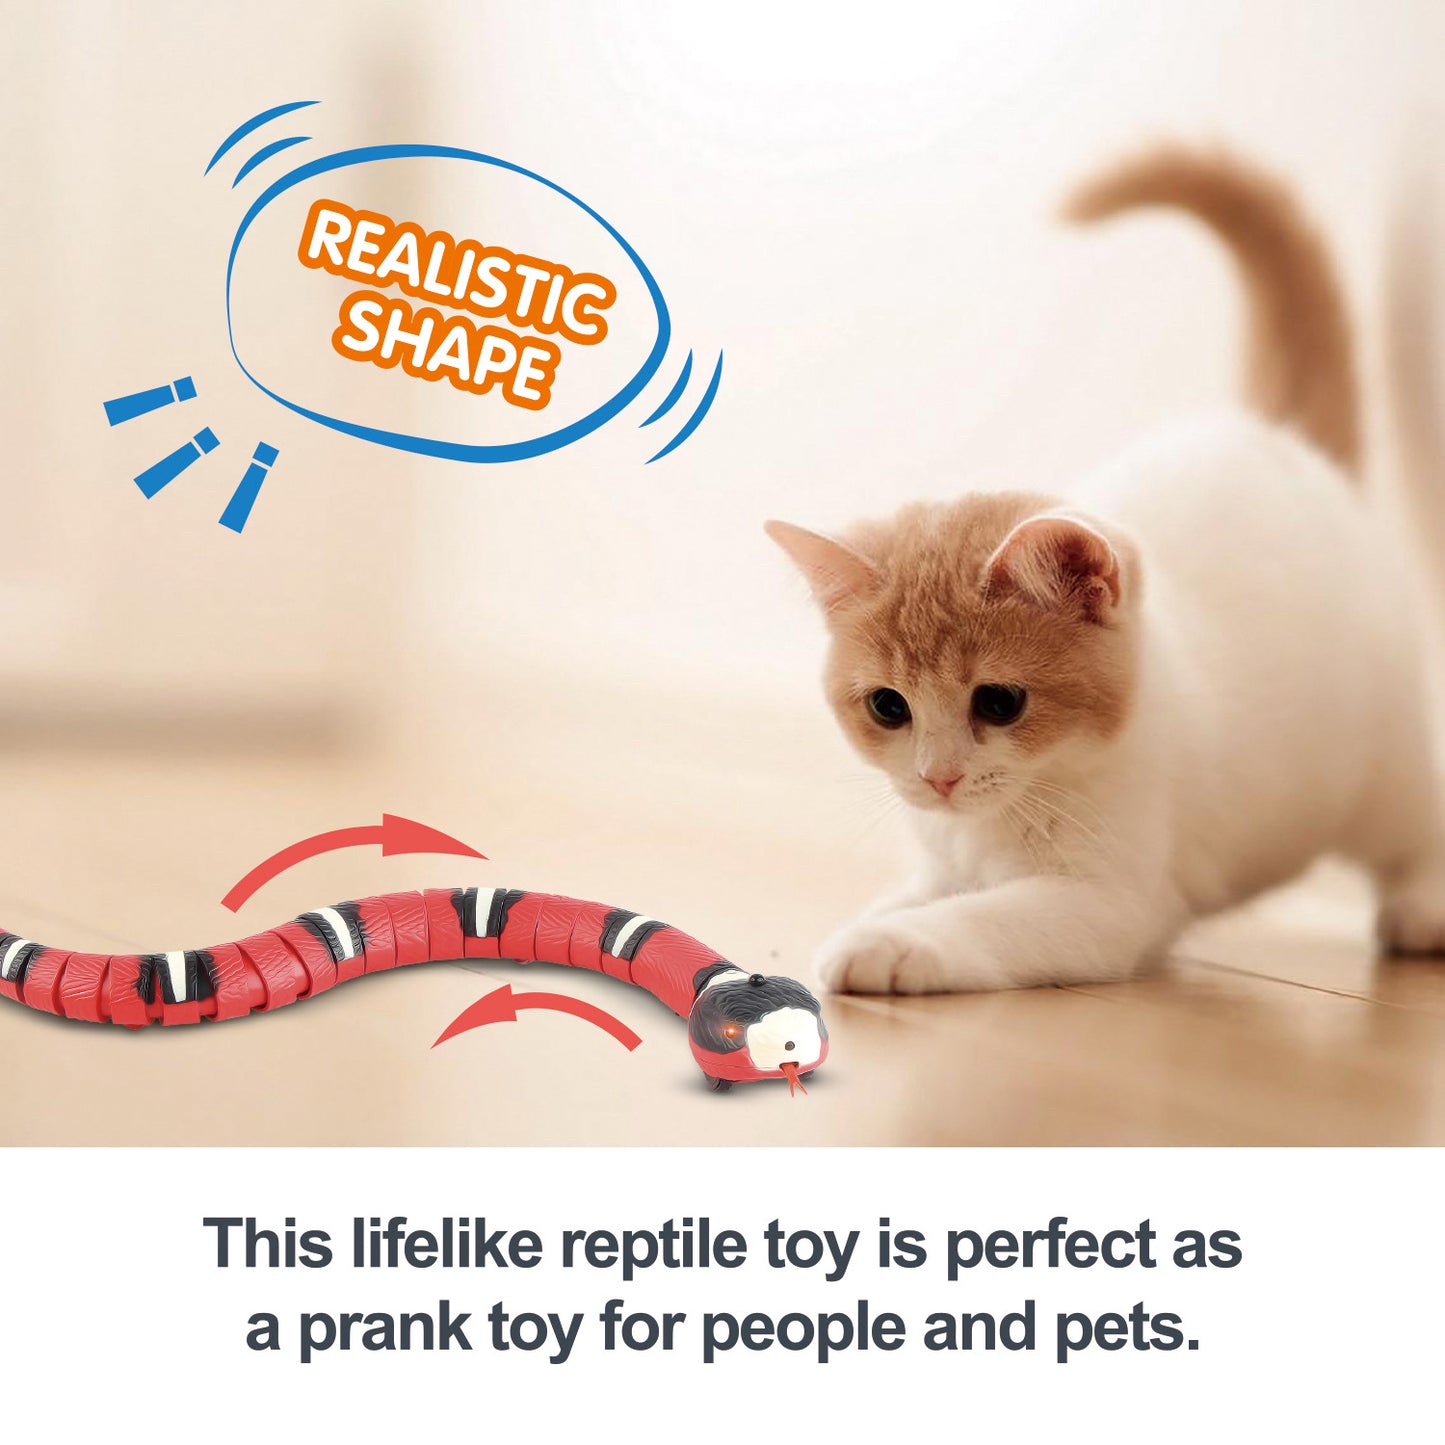 Interactive Smart Cat Toy with Automatic Sensing